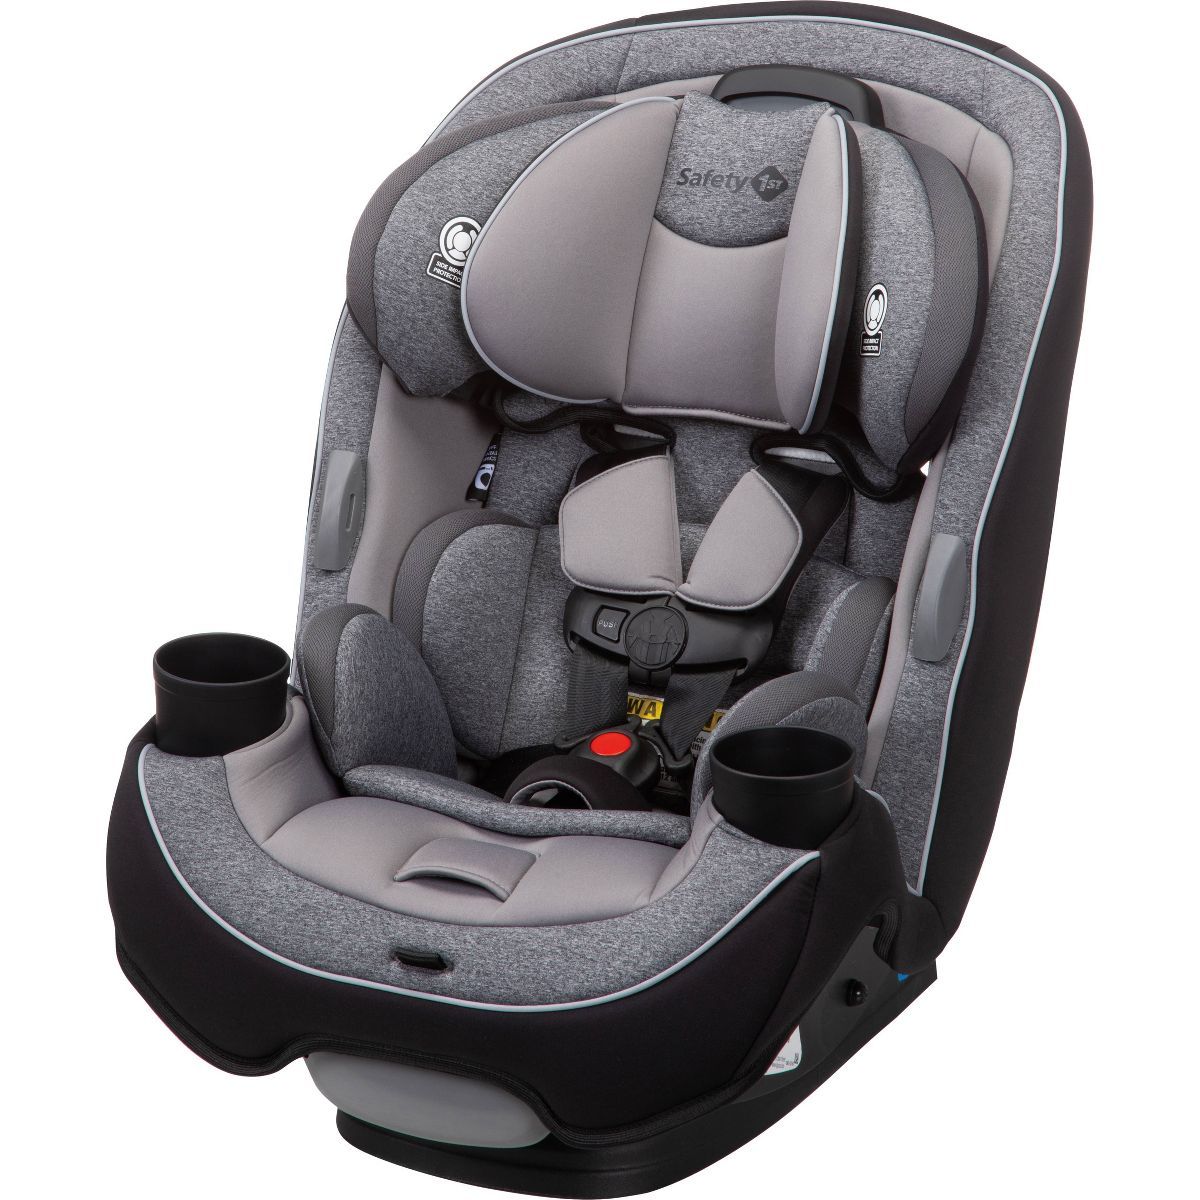 Safety 1st Grow and Go All-in-1 Convertible Car Seat - Shadow | Target